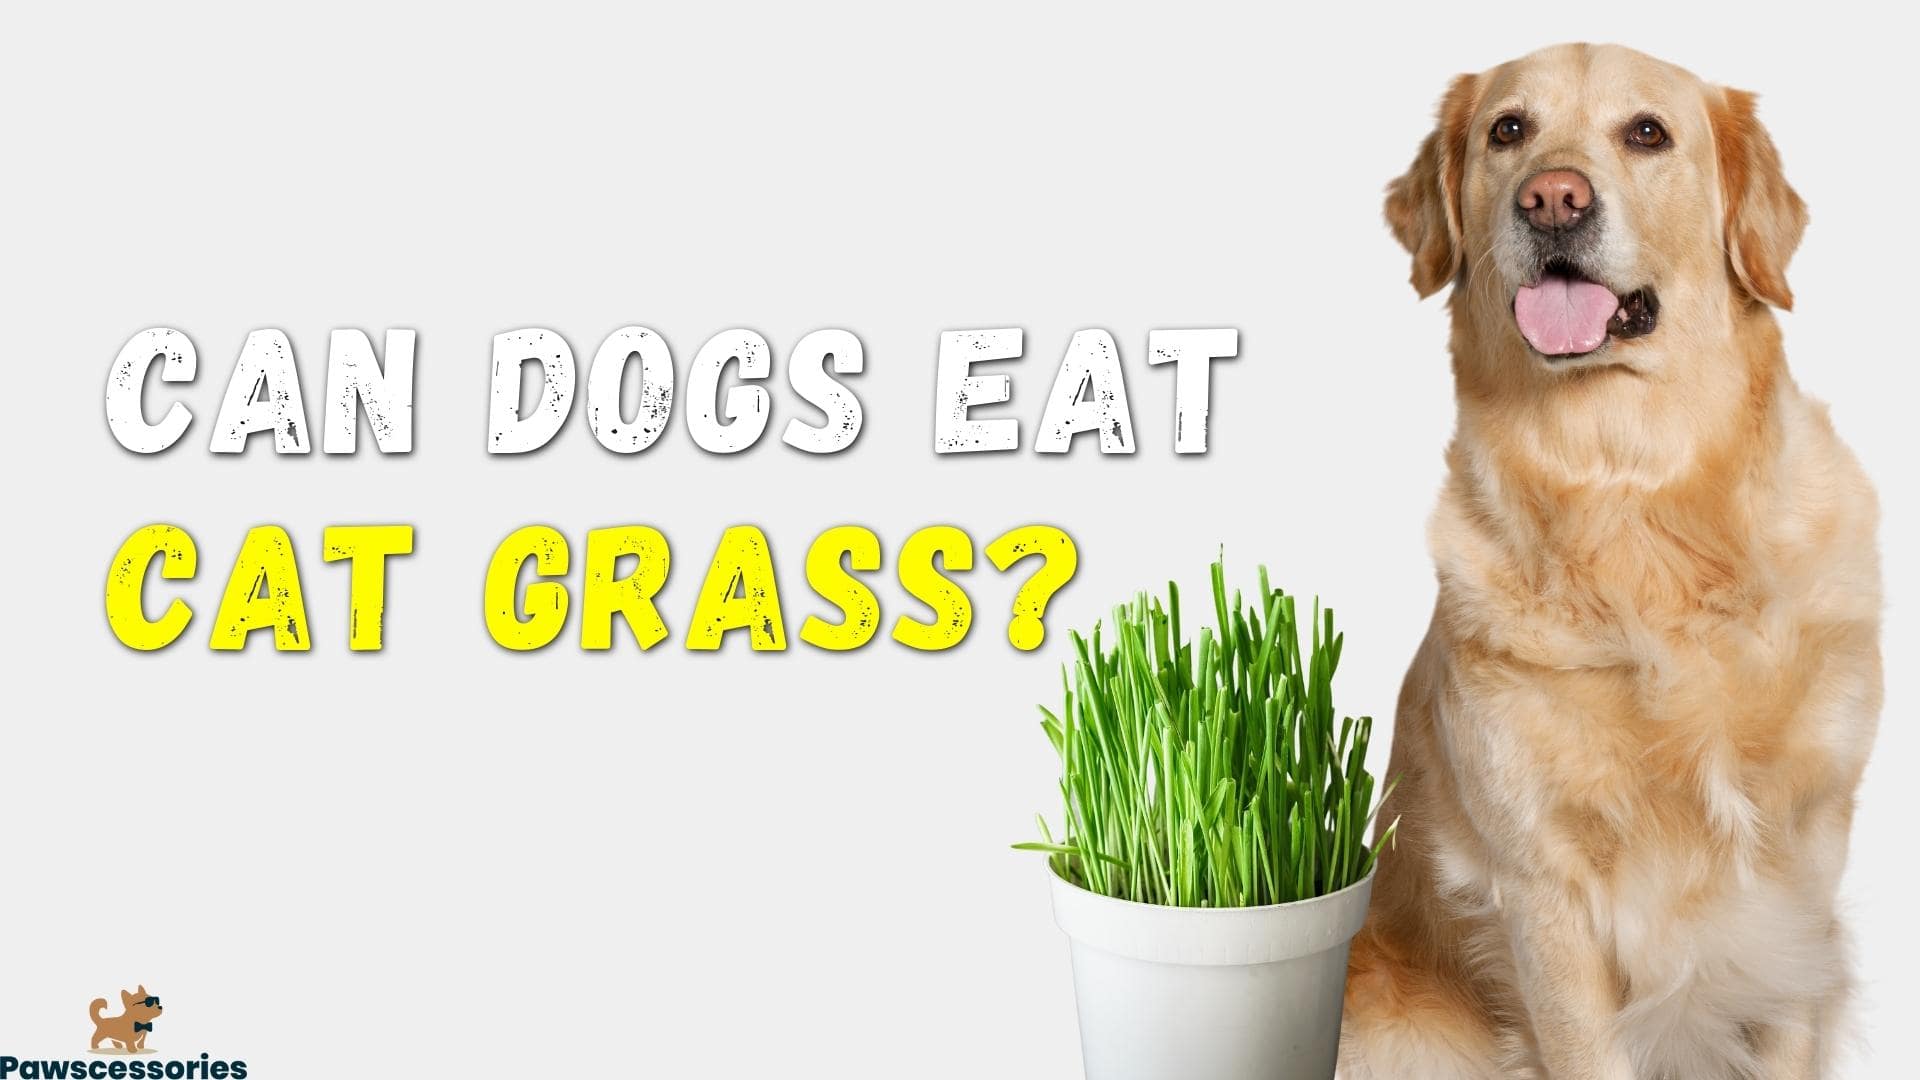 Can Dogs Eat Cat Grass